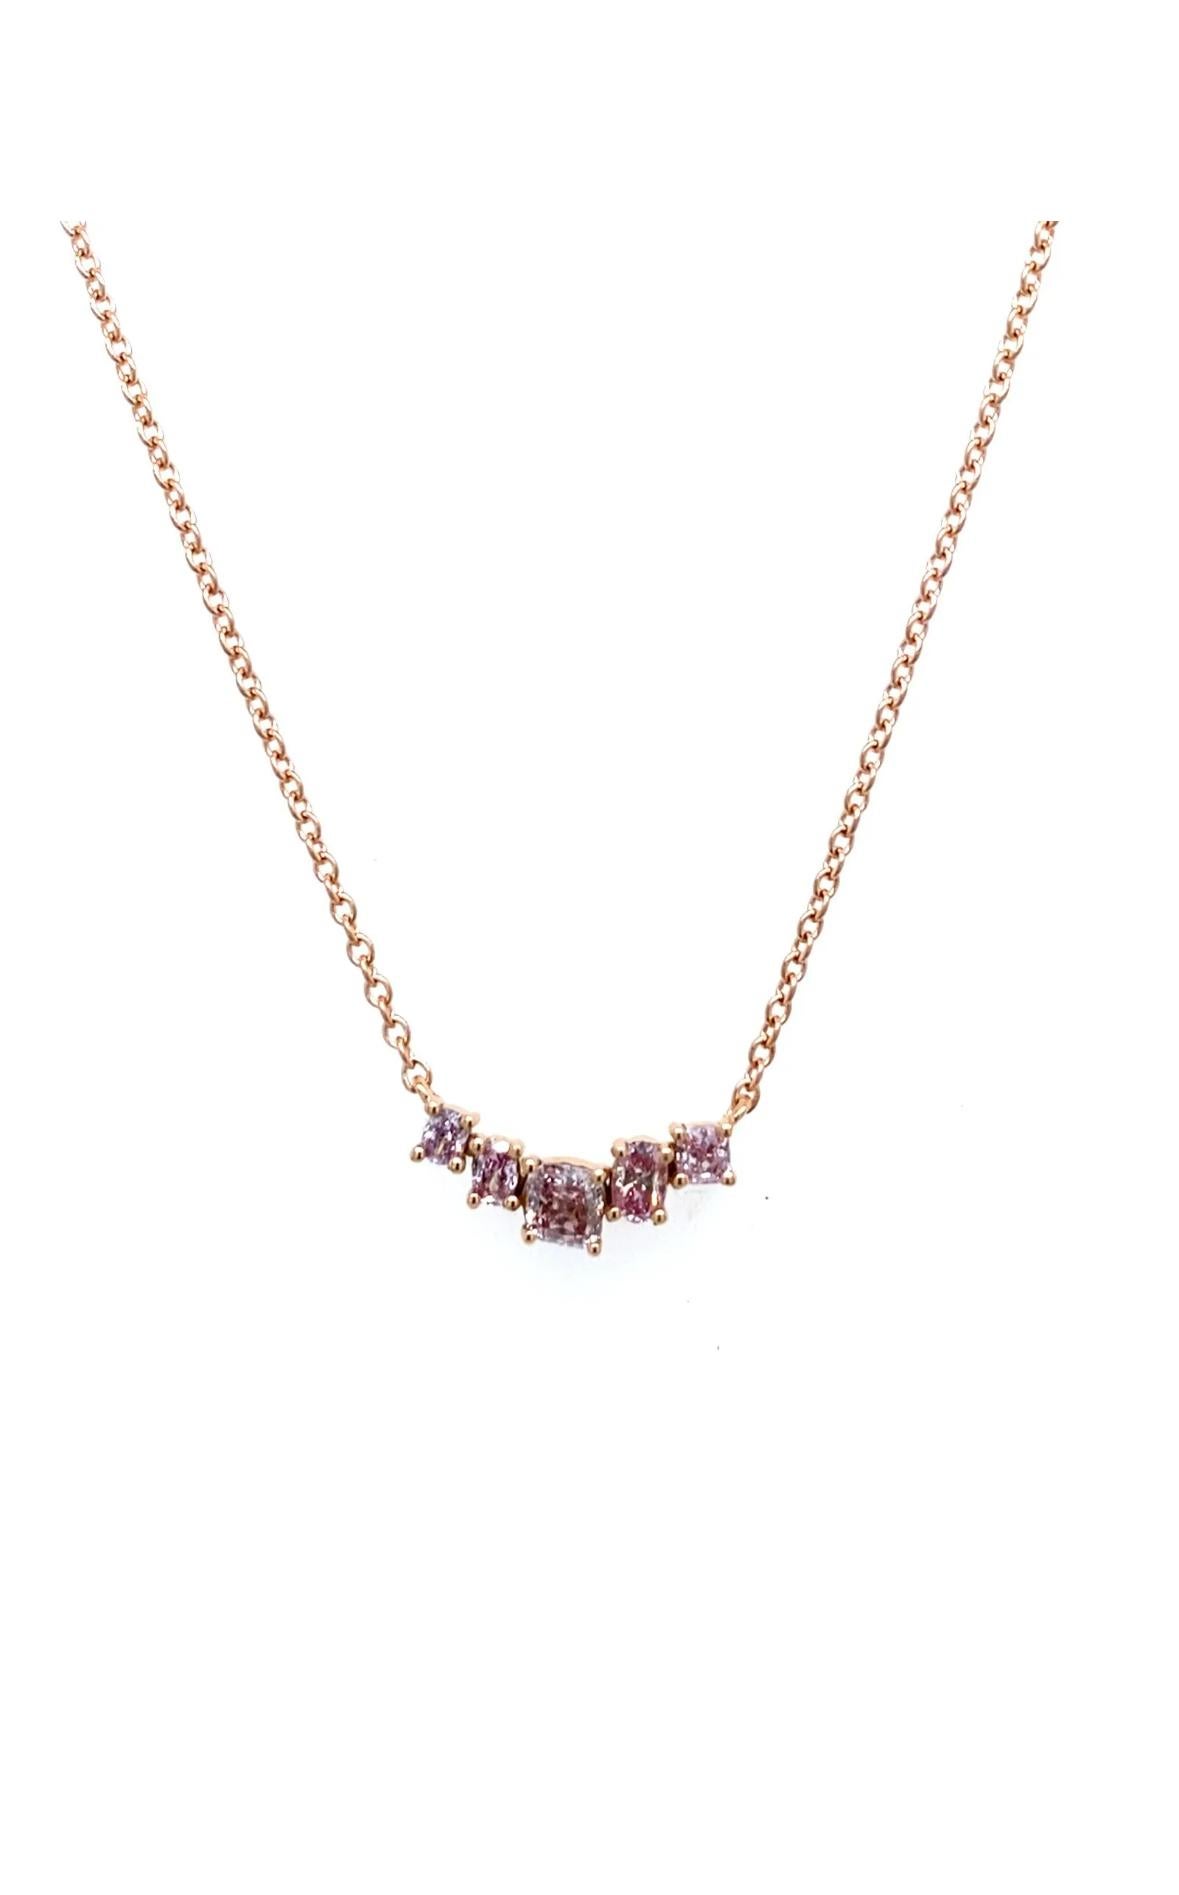 Round Cut 5-Stone Natural Pink Intense Diamond Necklace in 18ct Yellow Gold, 0.25ct For Sale